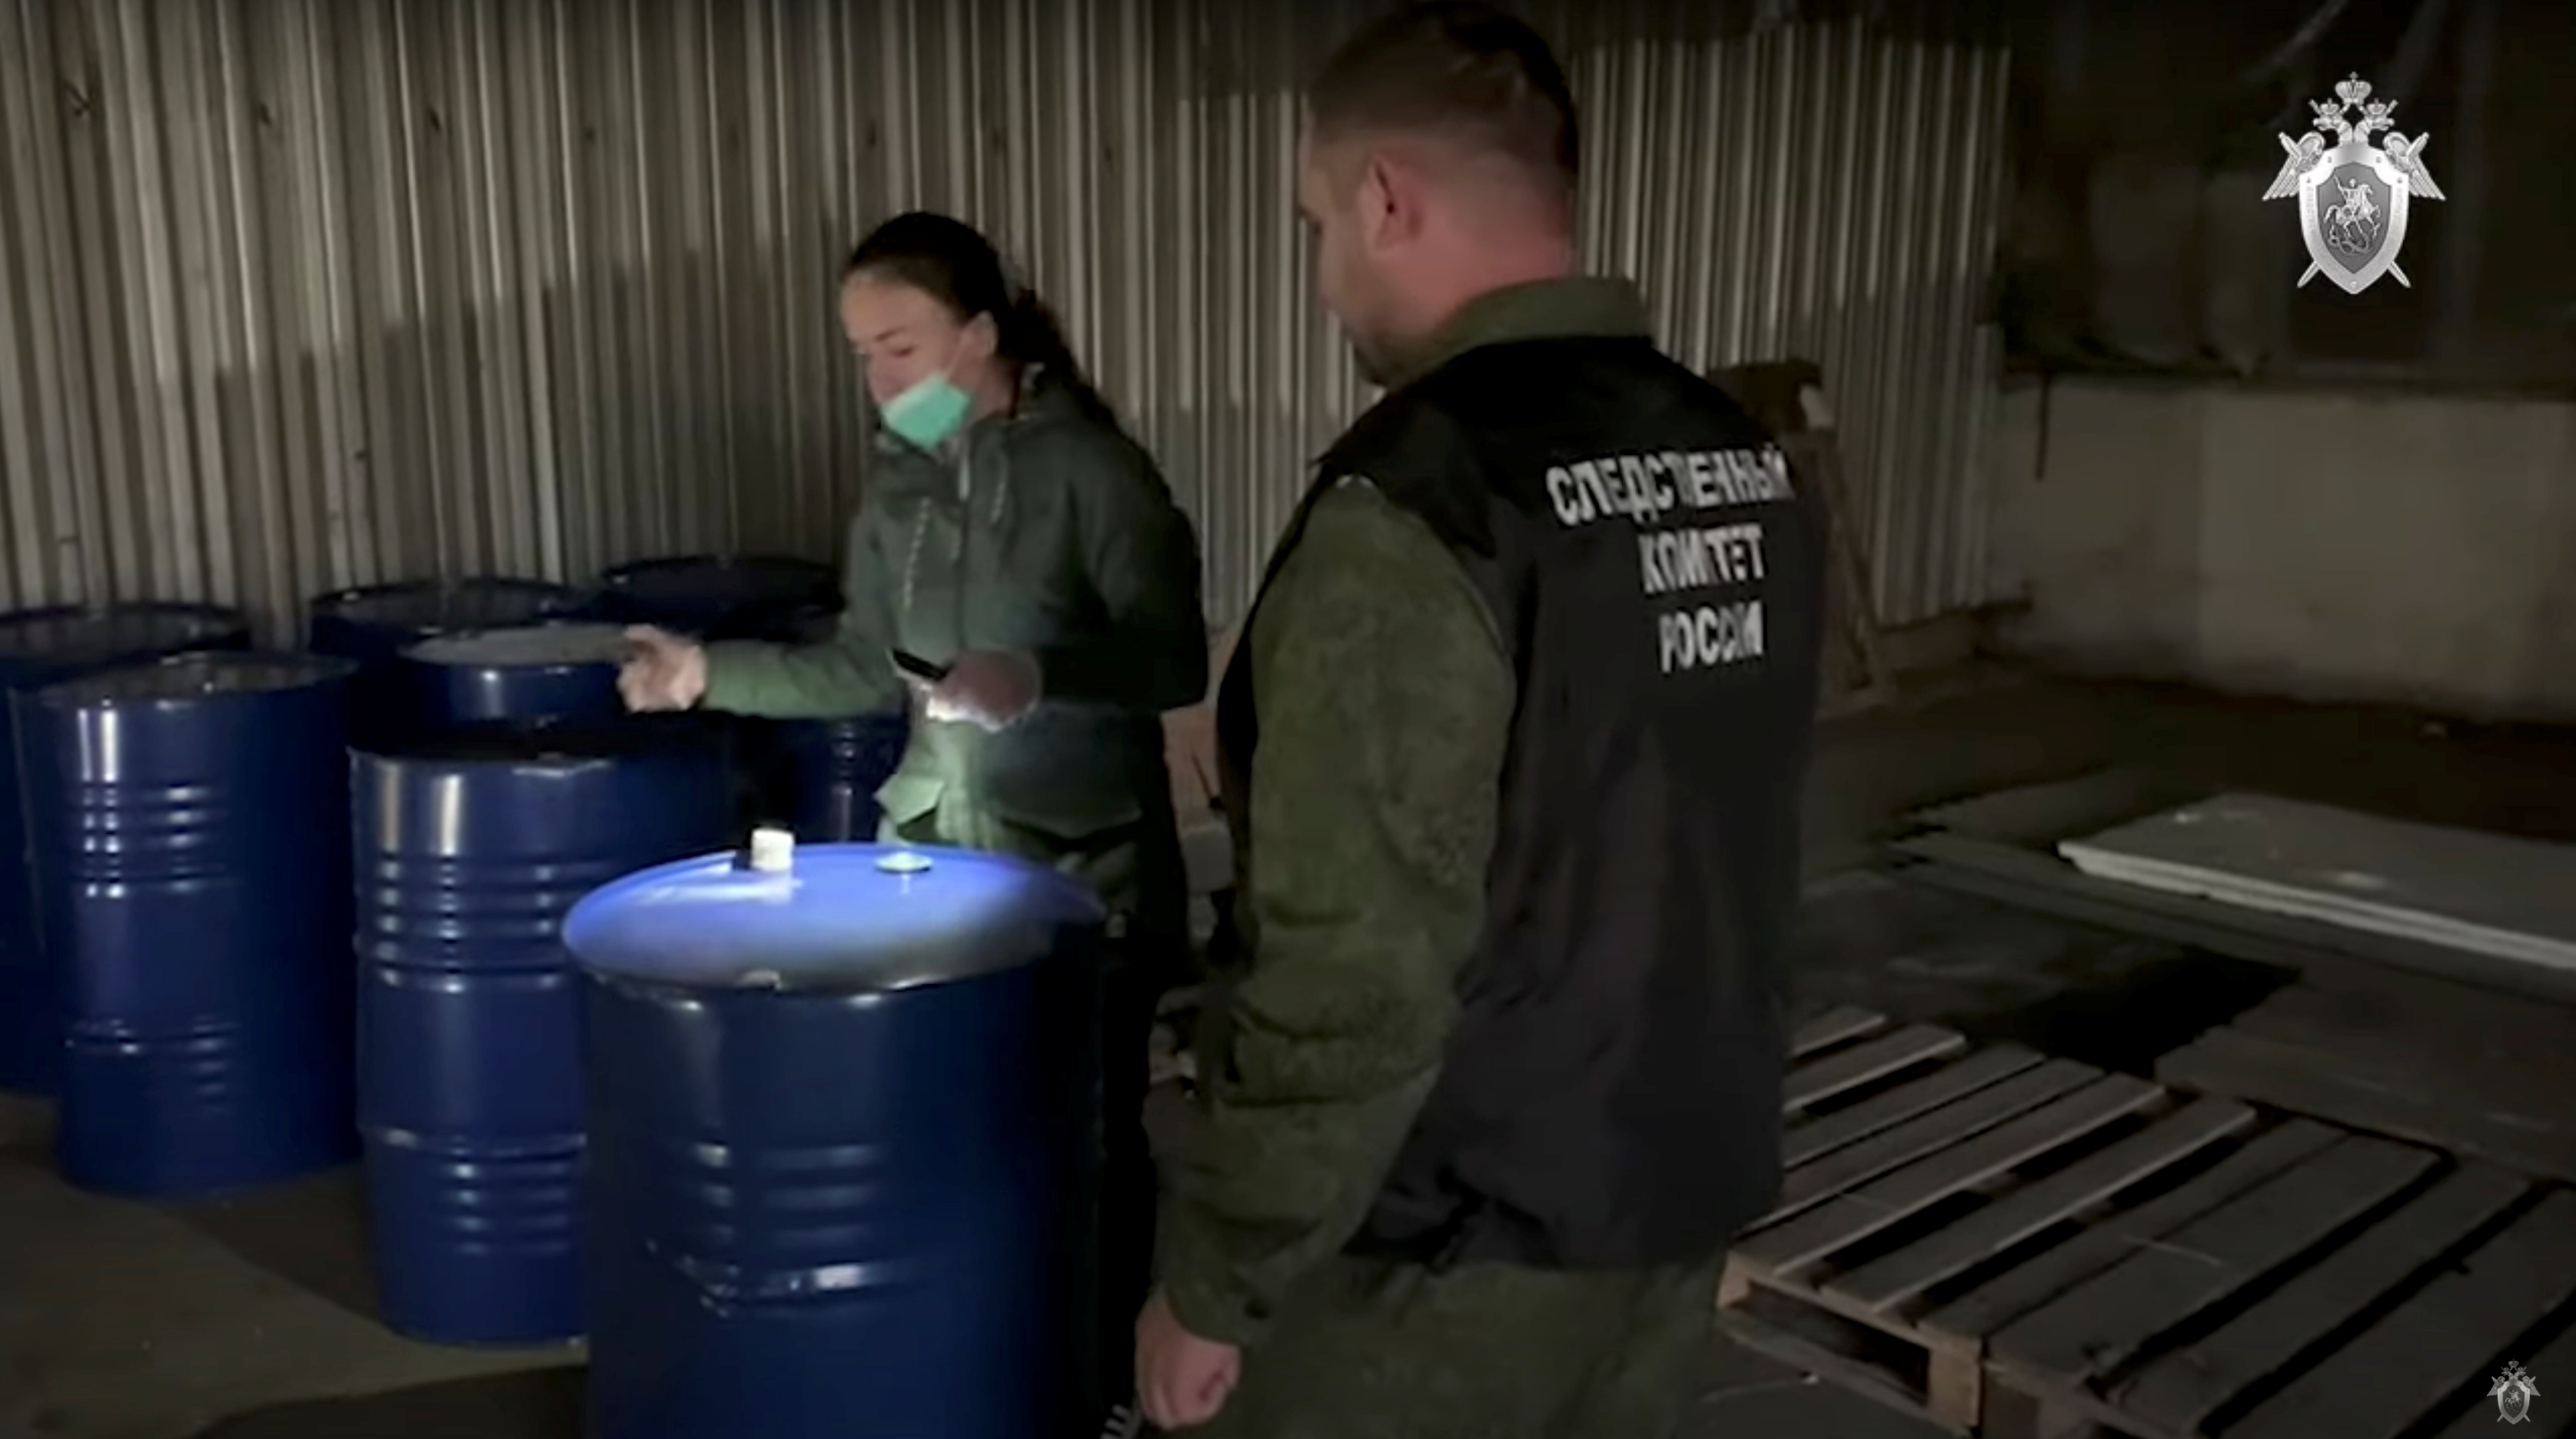 Members of the Russian Investigative Committee investigate a criminal case of deaths of people from alcohol poisoning after consuming locally produced spirits, in Orenburg Region, Russia, in this still image taken from video released October 9, 2021. Investigative Committee of Russia/Handout via REUTERS 